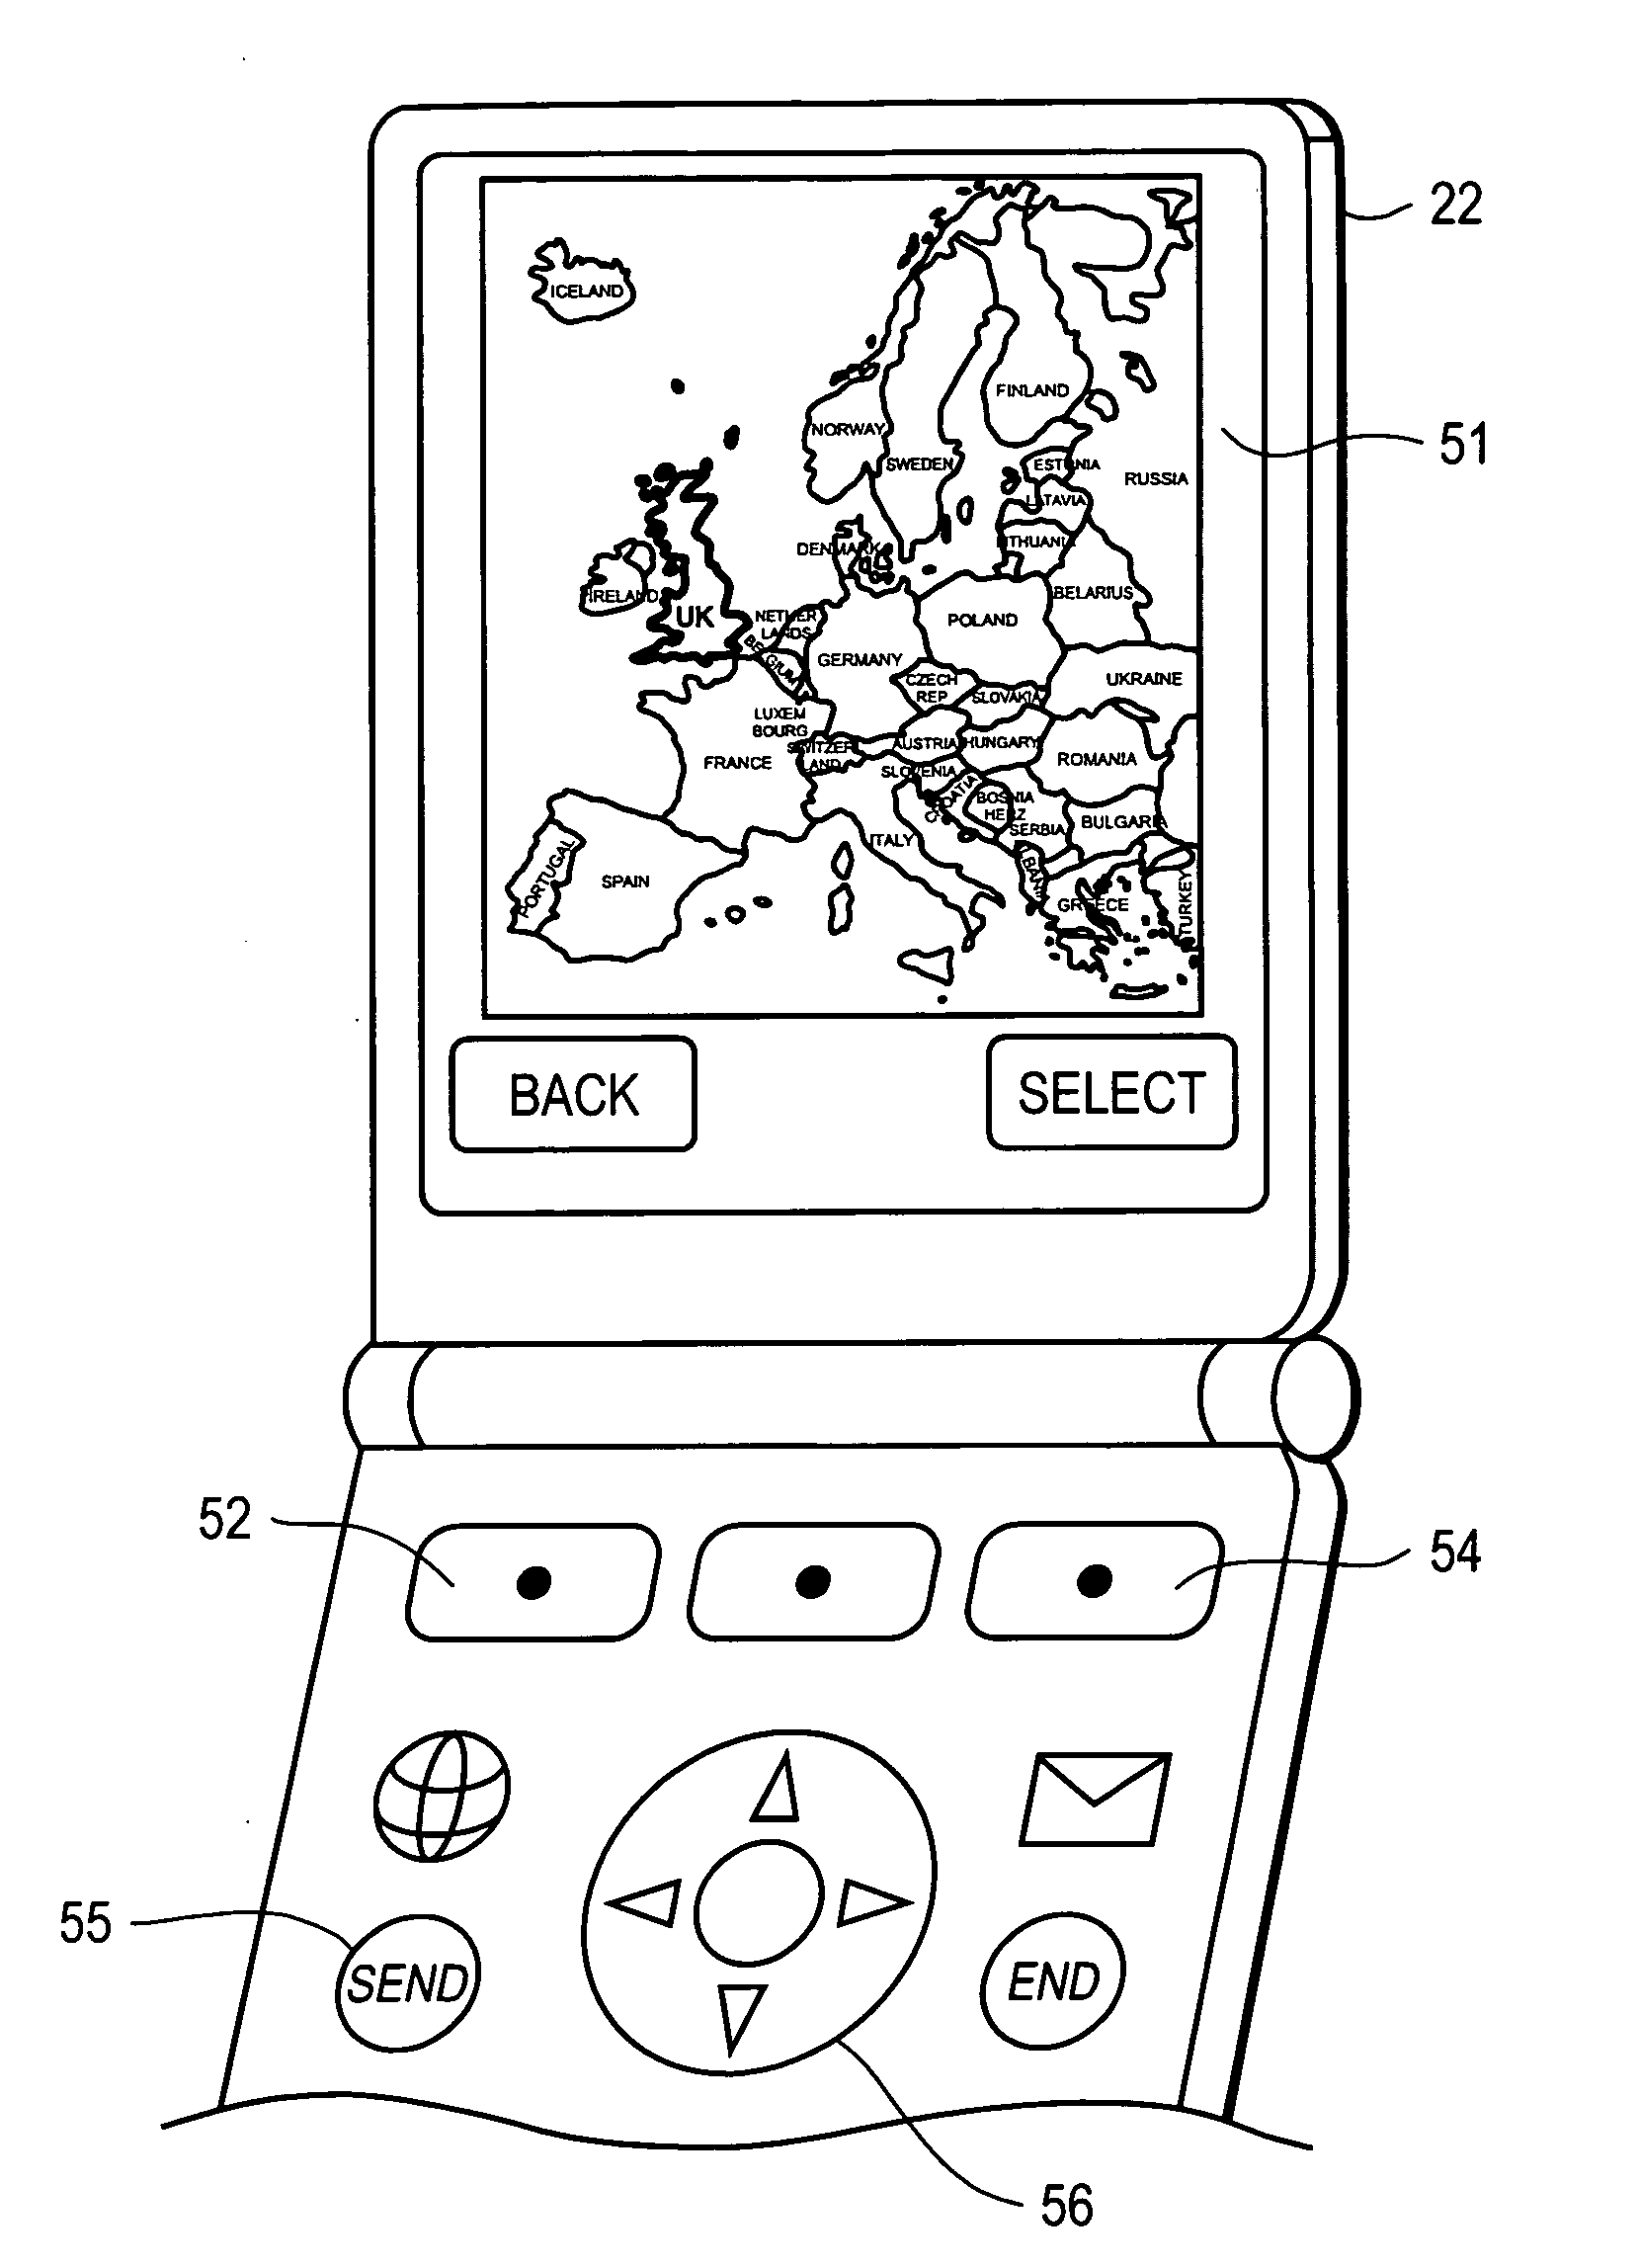 Dialing assistant that includes an interface with a geographic display